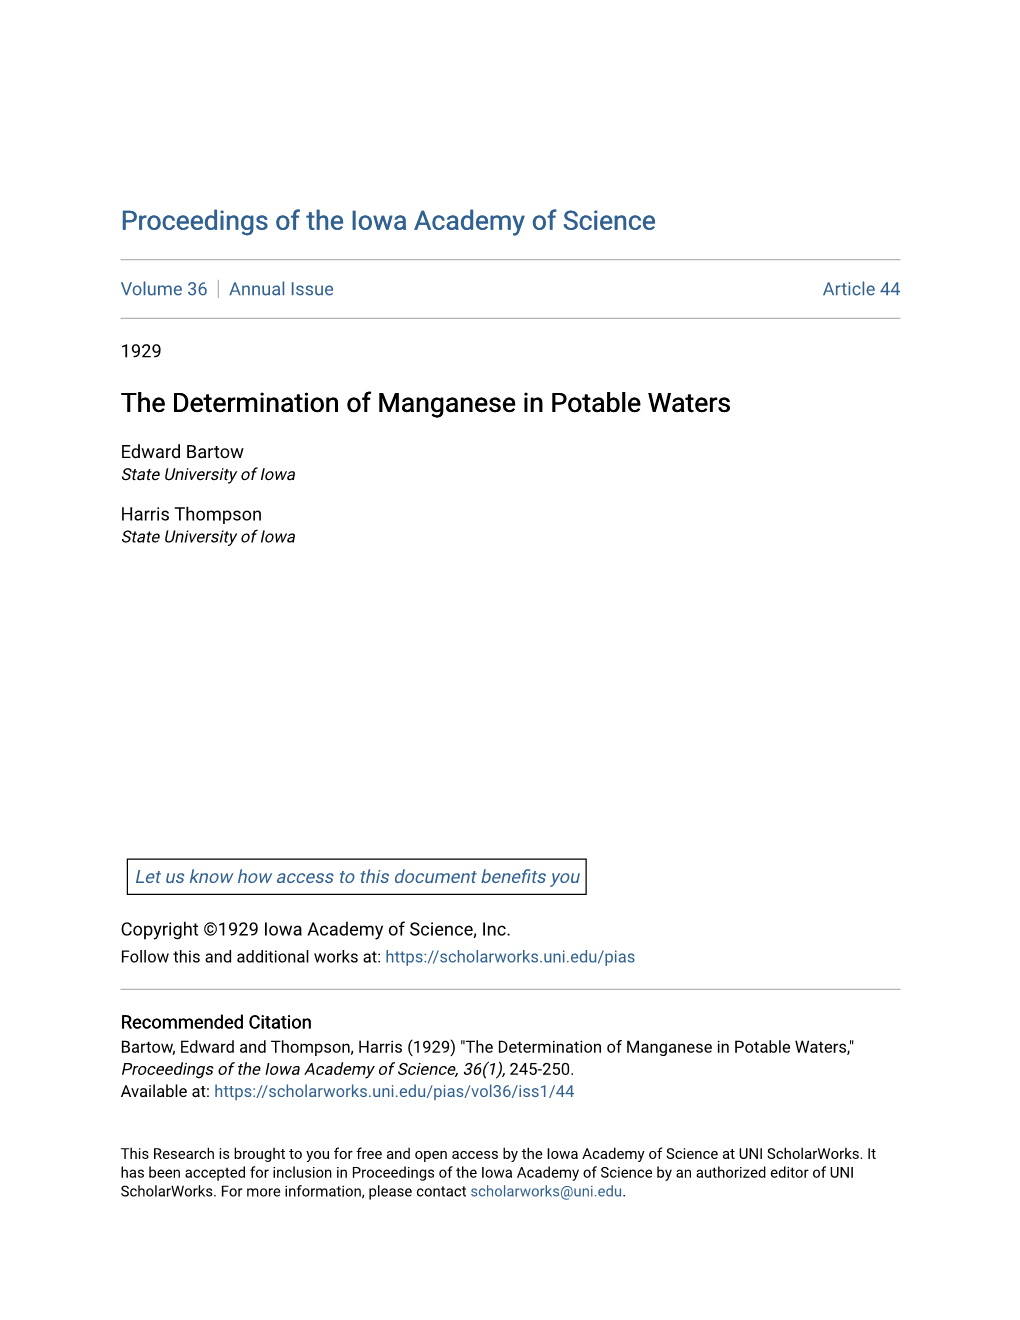 The Determination of Manganese in Potable Waters